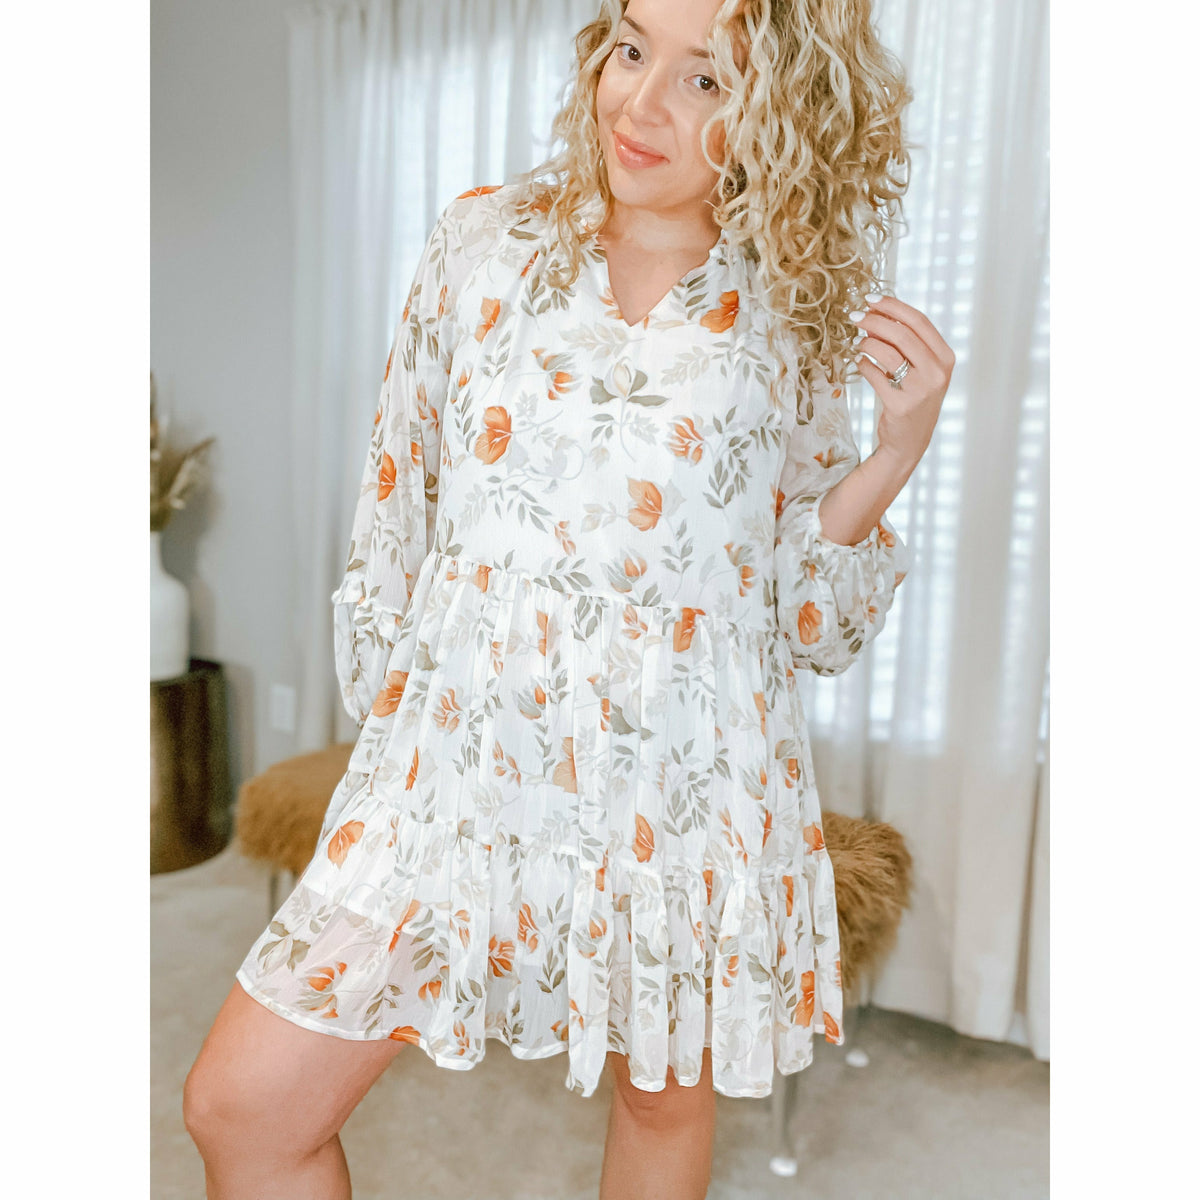 Katherine Floral Dress - The Hive by Chris Jesselle